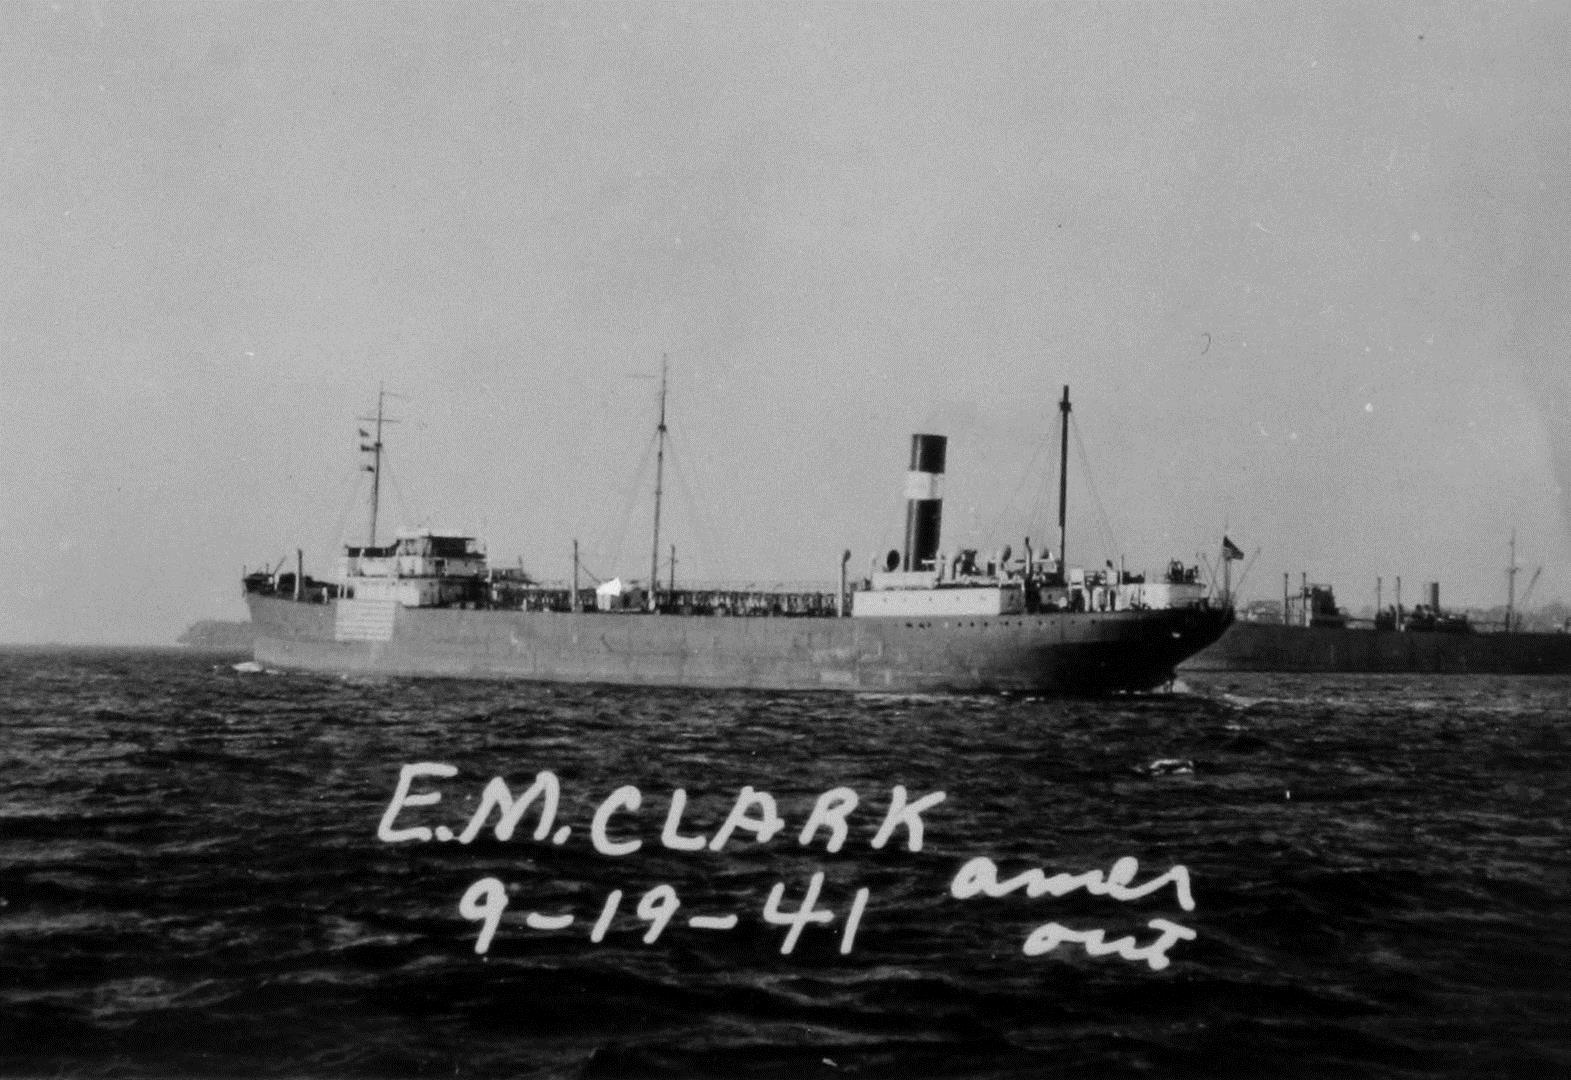 E.M. Clark, location unknown, dated September 19, 1941